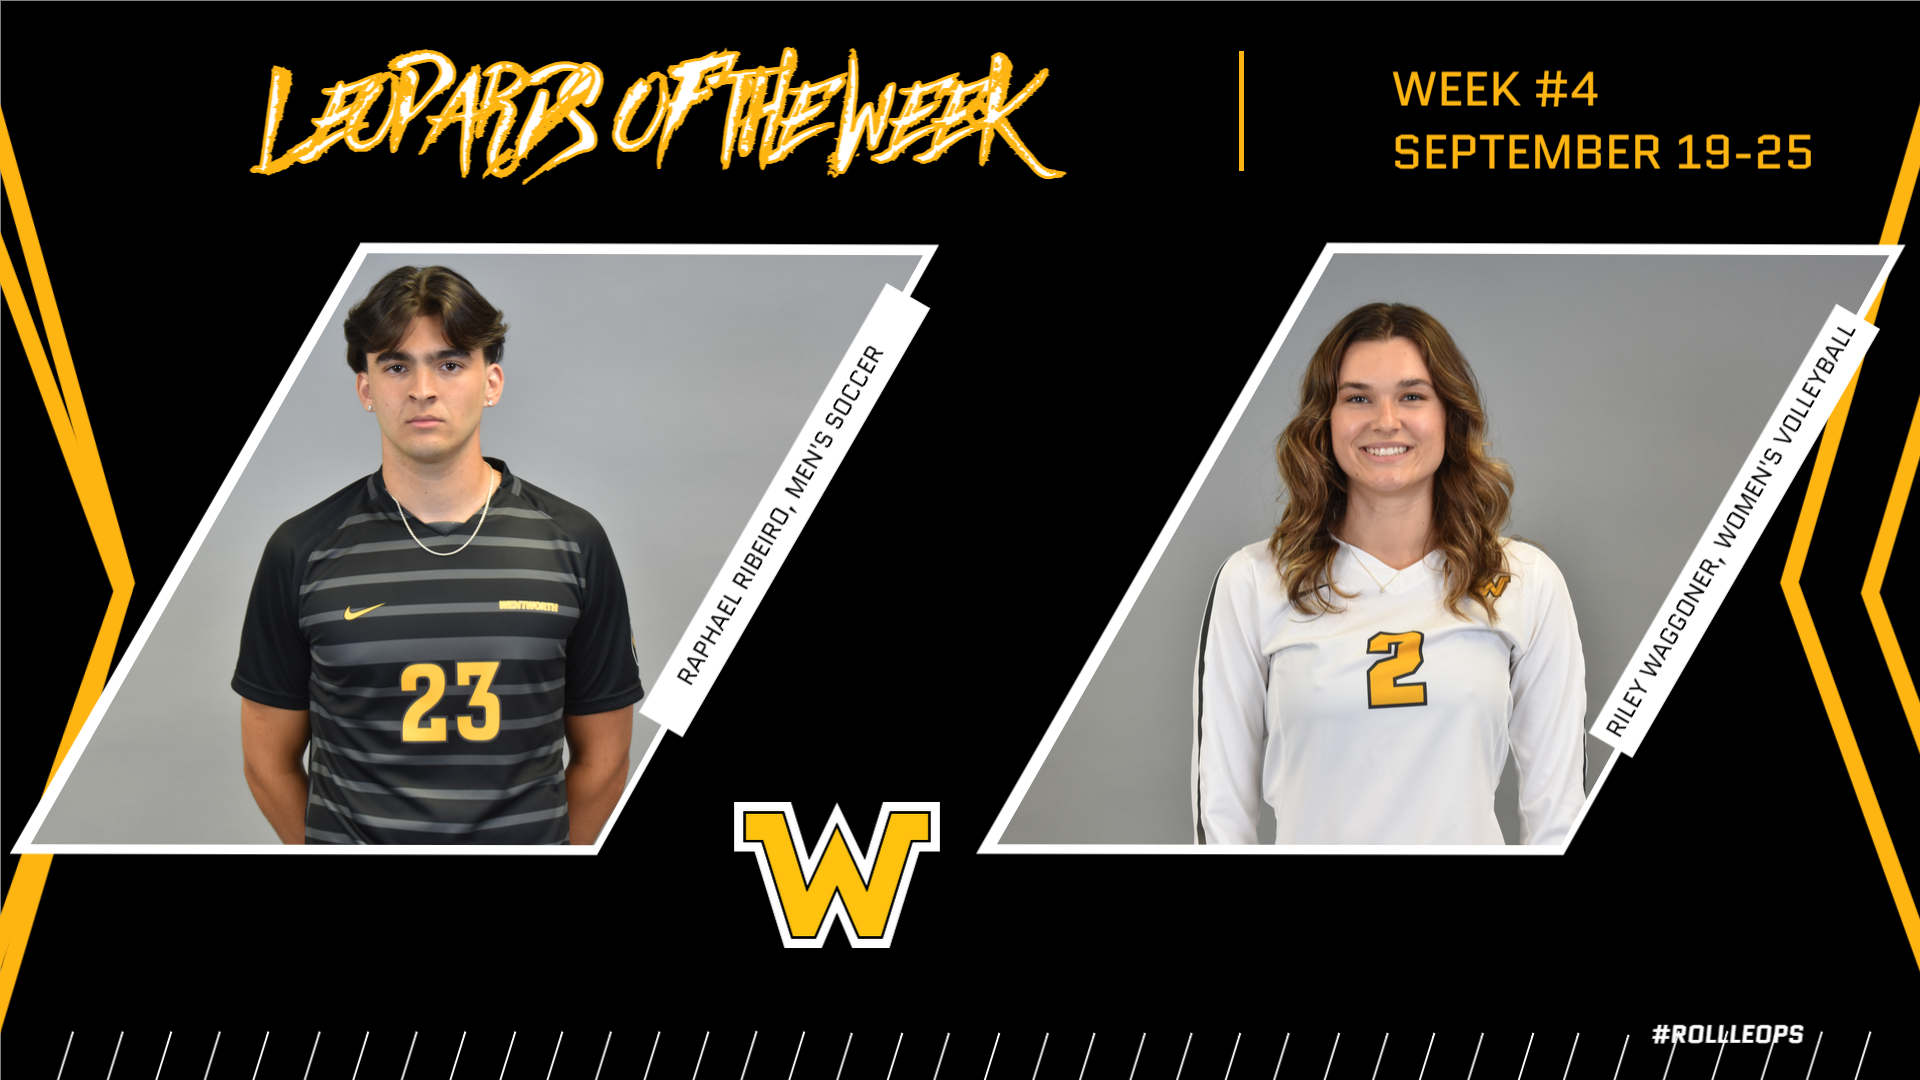 Ribeiro, Waggoner Named Leopards of the Week